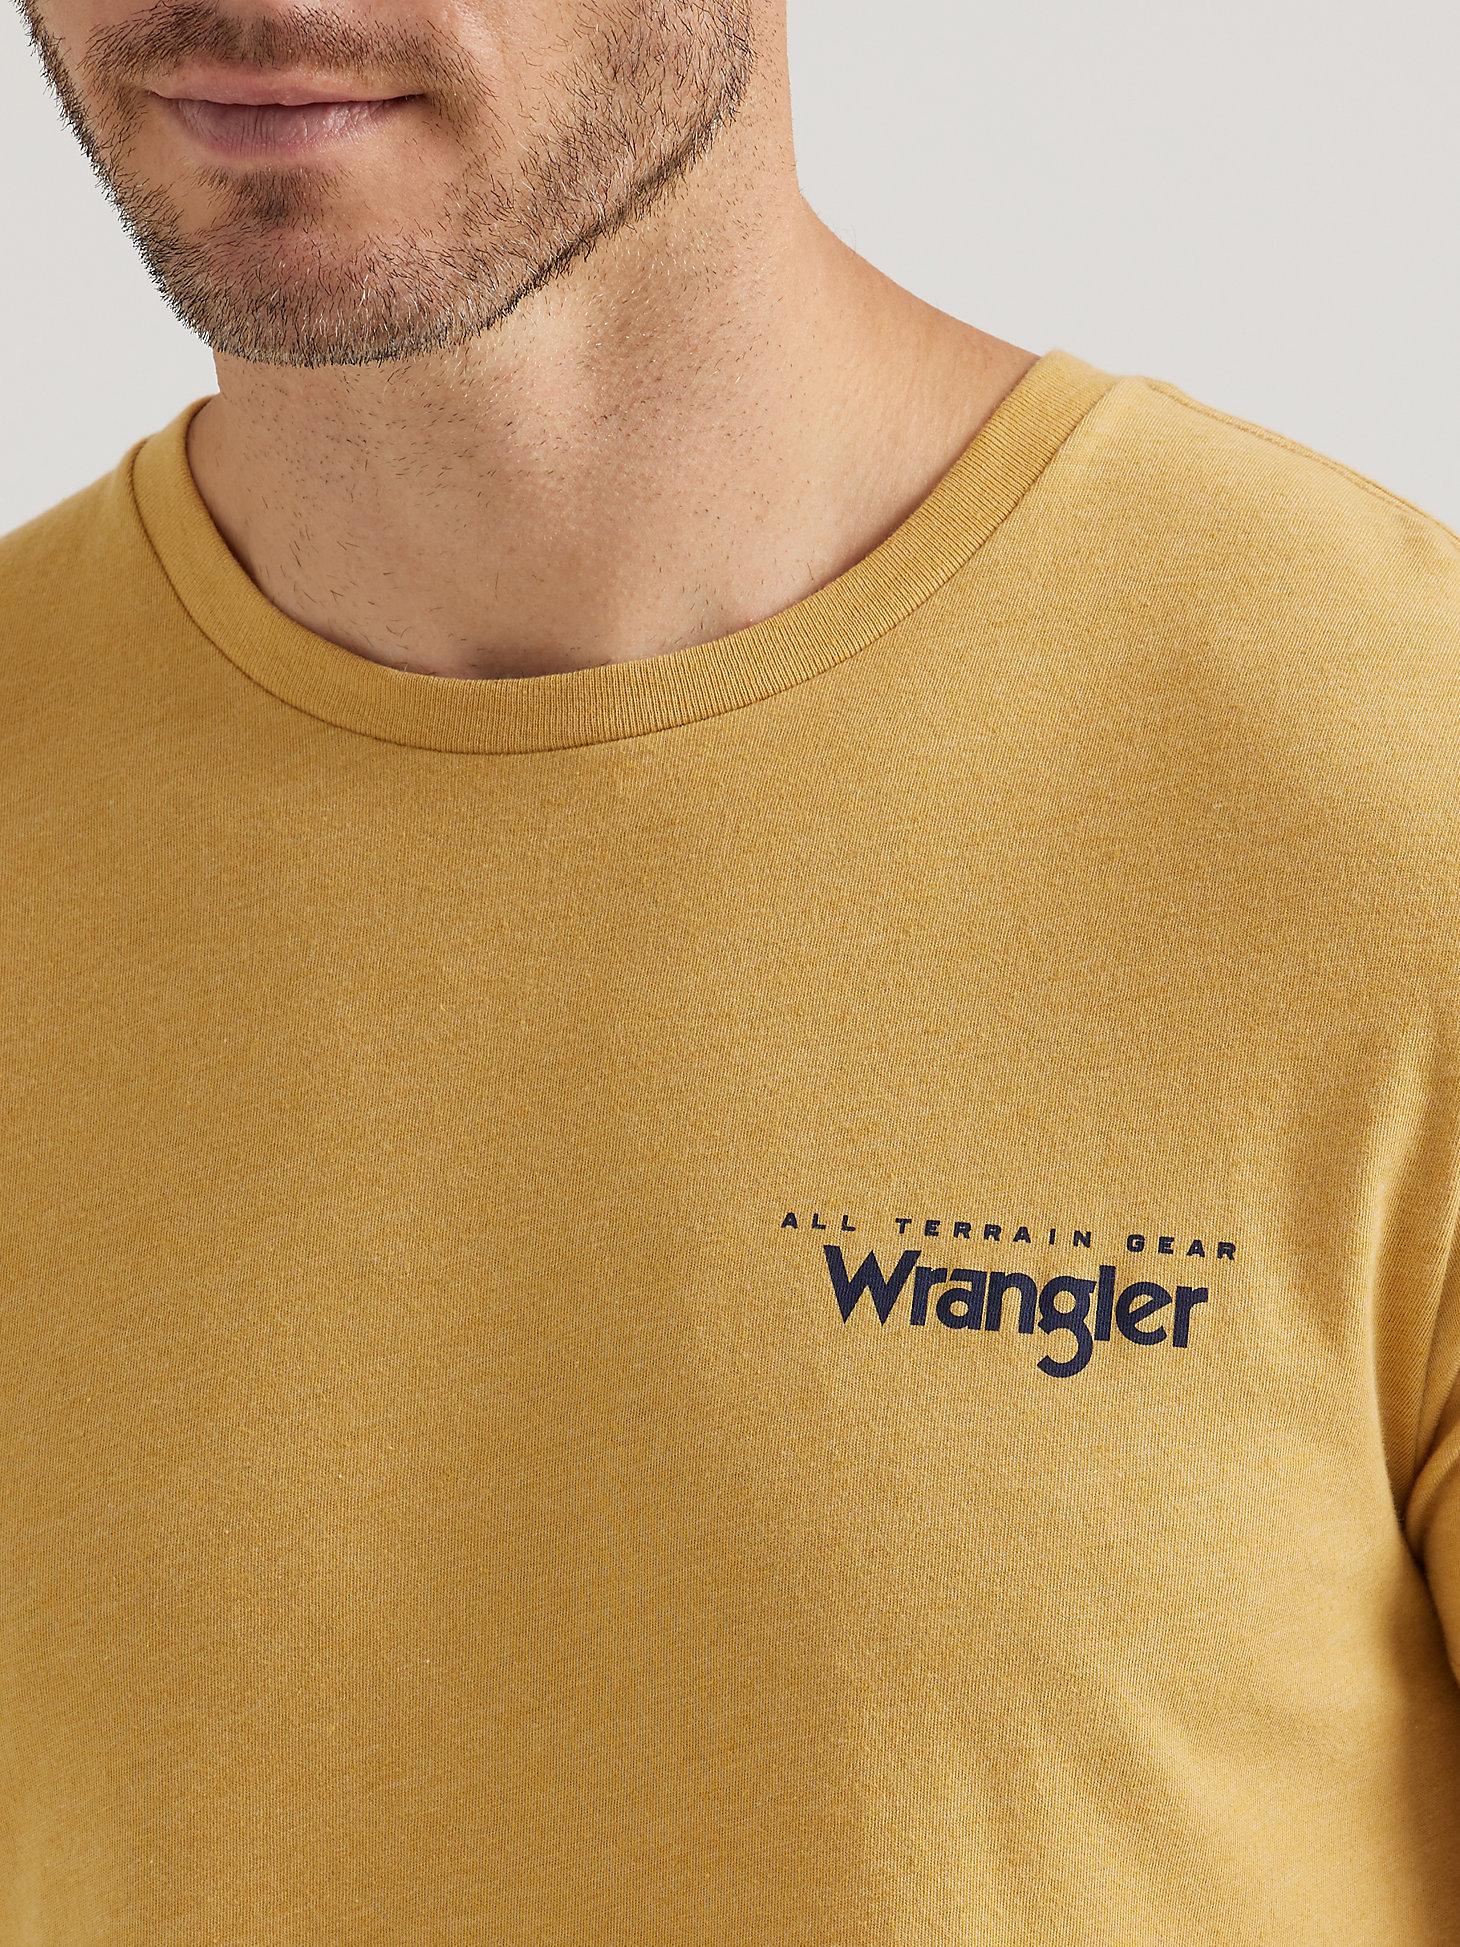 ATG By Wrangler® Men's Mountain Path T-Shirt in Pale Gold alternative view 3